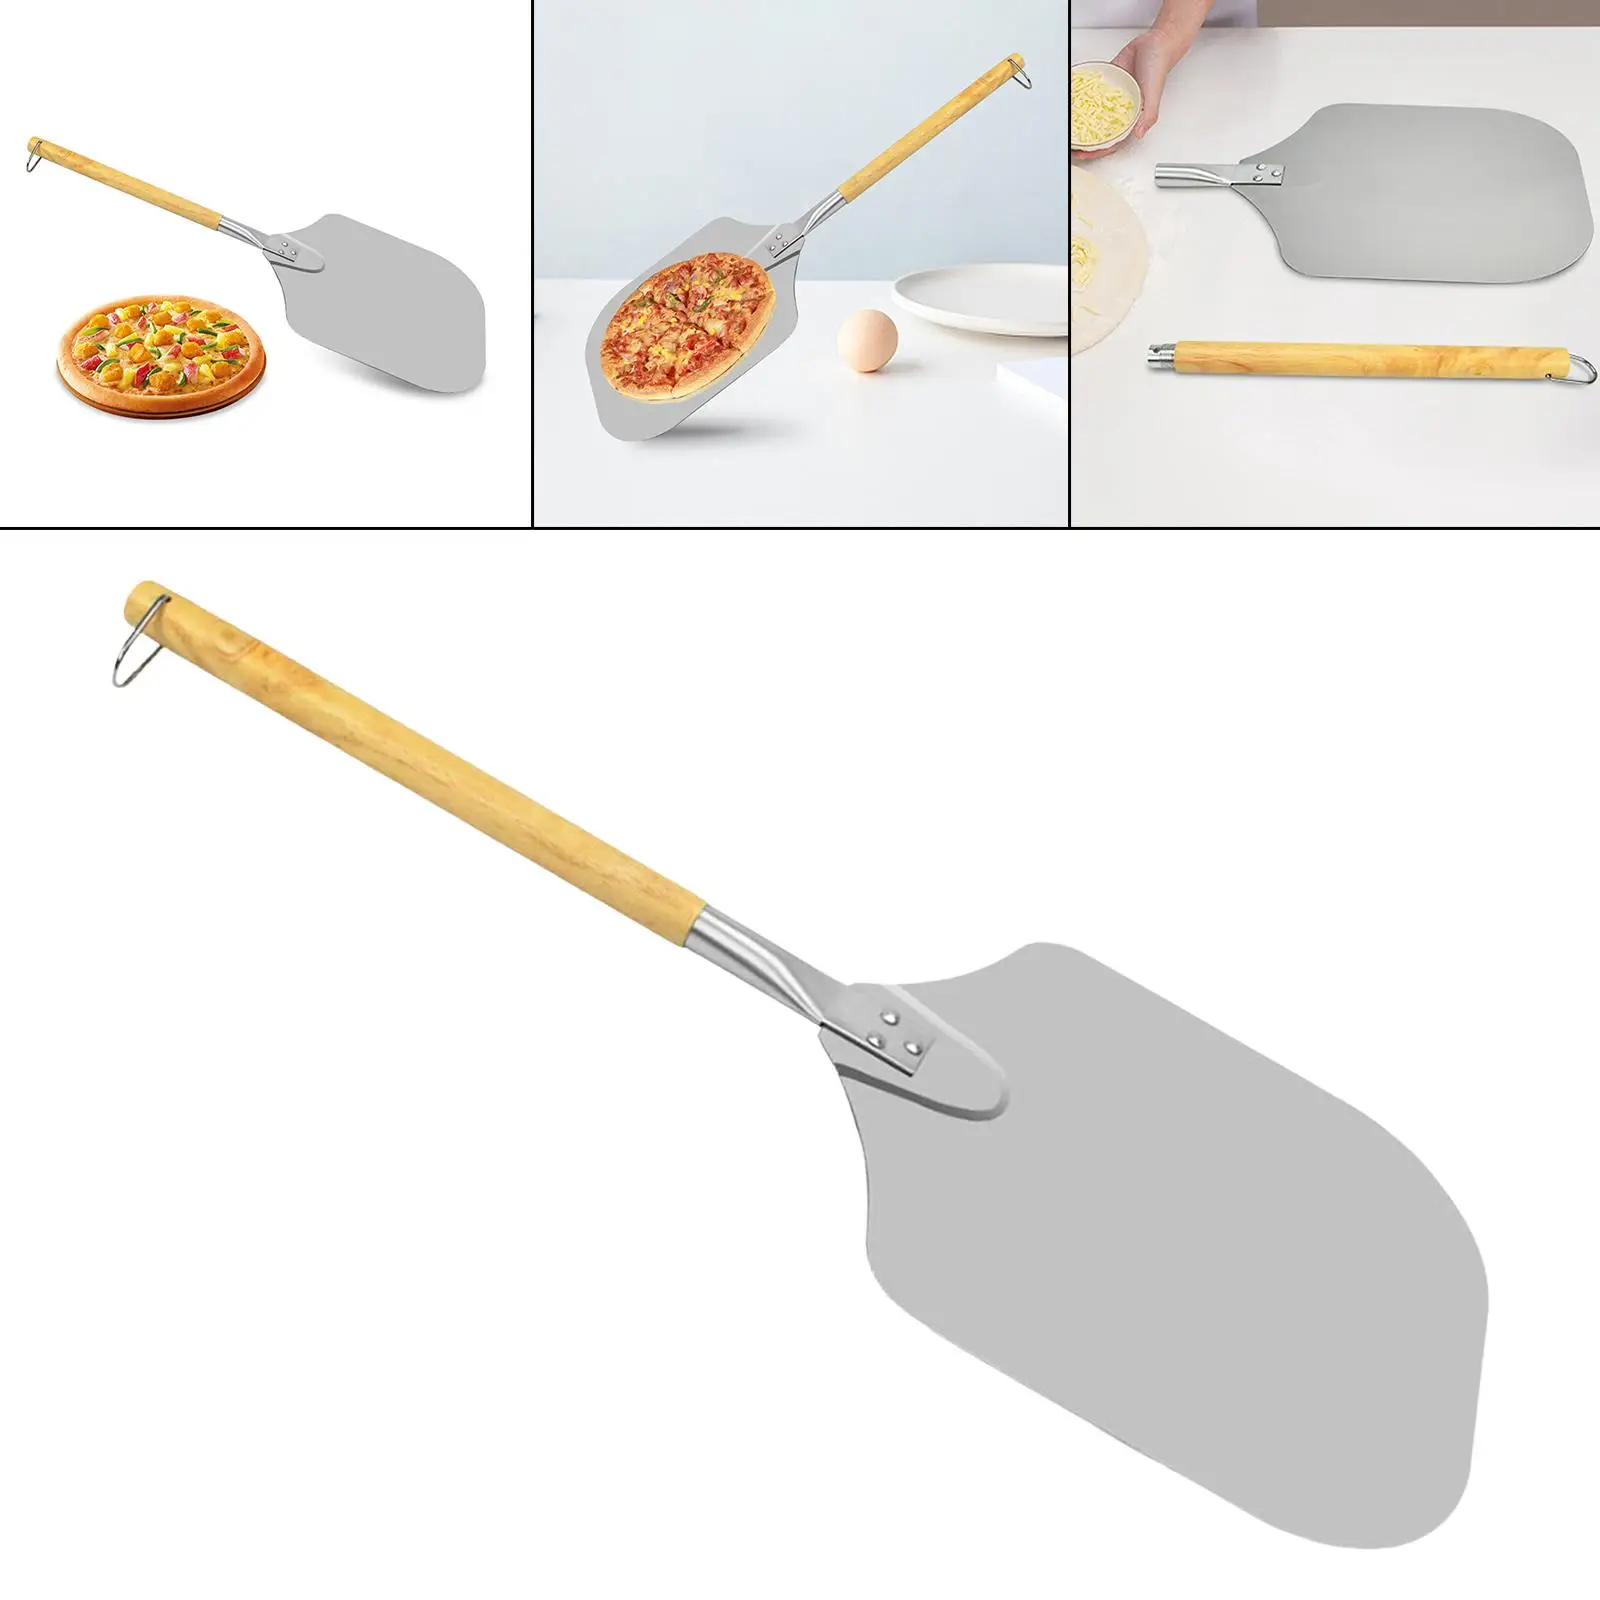 Practical Stainless Steel  Peel Wooden Handle for Bread Pastry Oven or Grill Use Kitchen Baking Tools  Spatula  Shovel